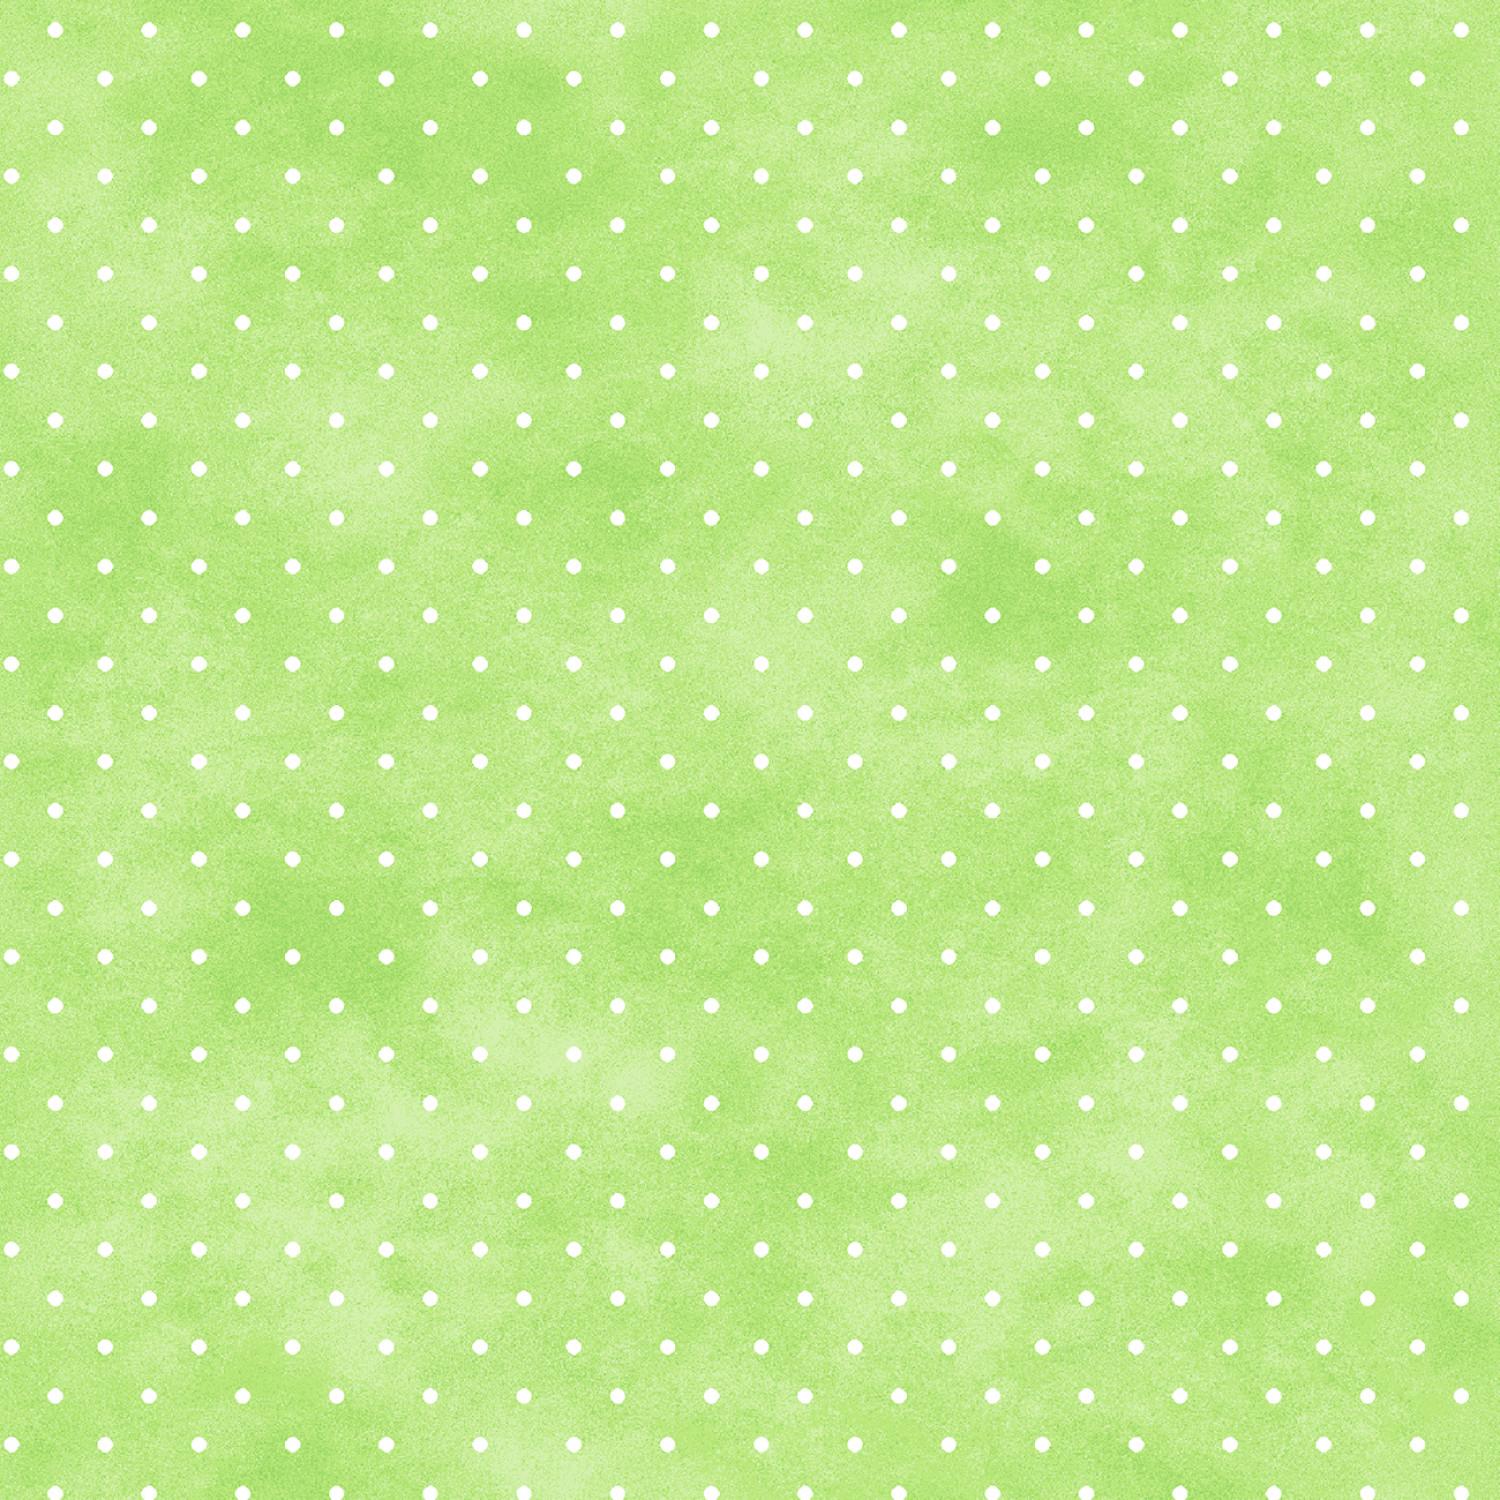 Playtime Flannel - Tiny Dot - Green - MASF10690-G